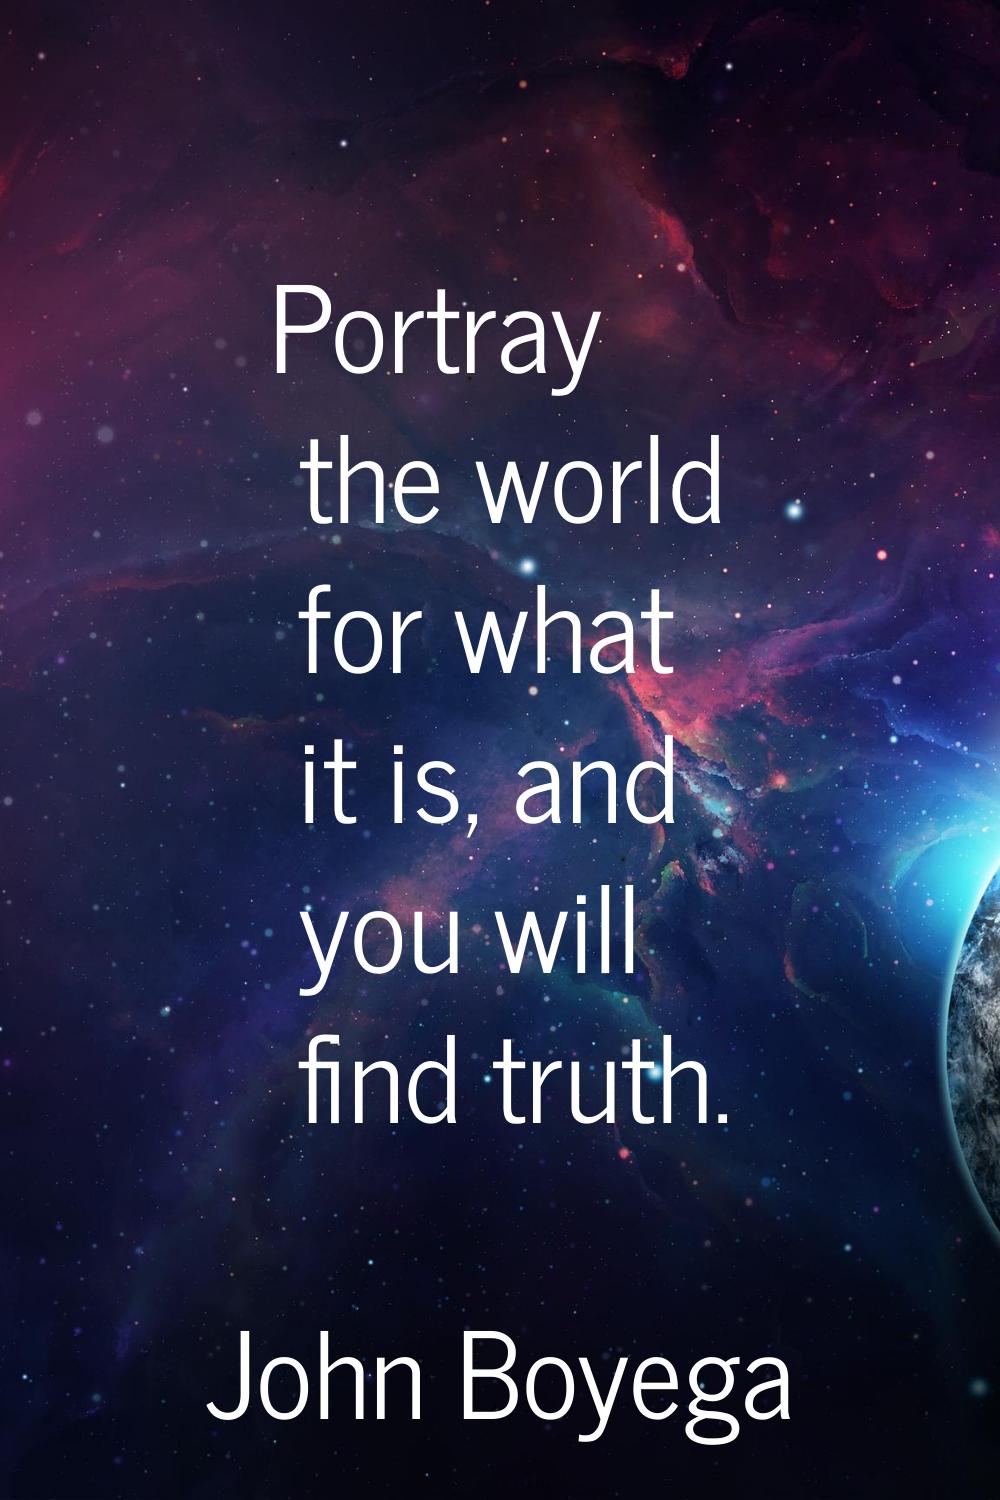 Portray the world for what it is, and you will find truth.